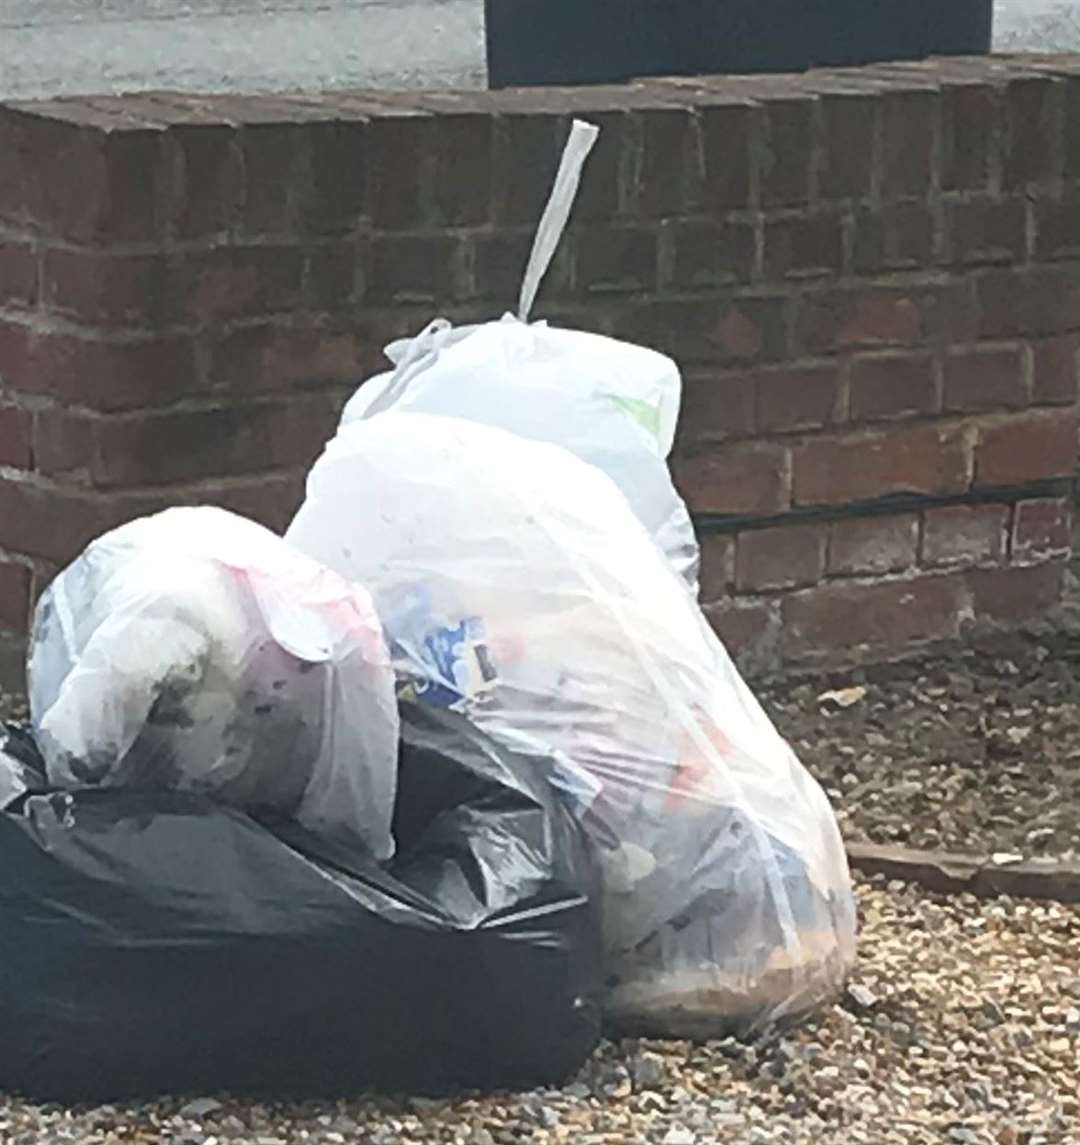 Bin bags left uncollected by bin men from the home of Chris Twyman in Maidstone